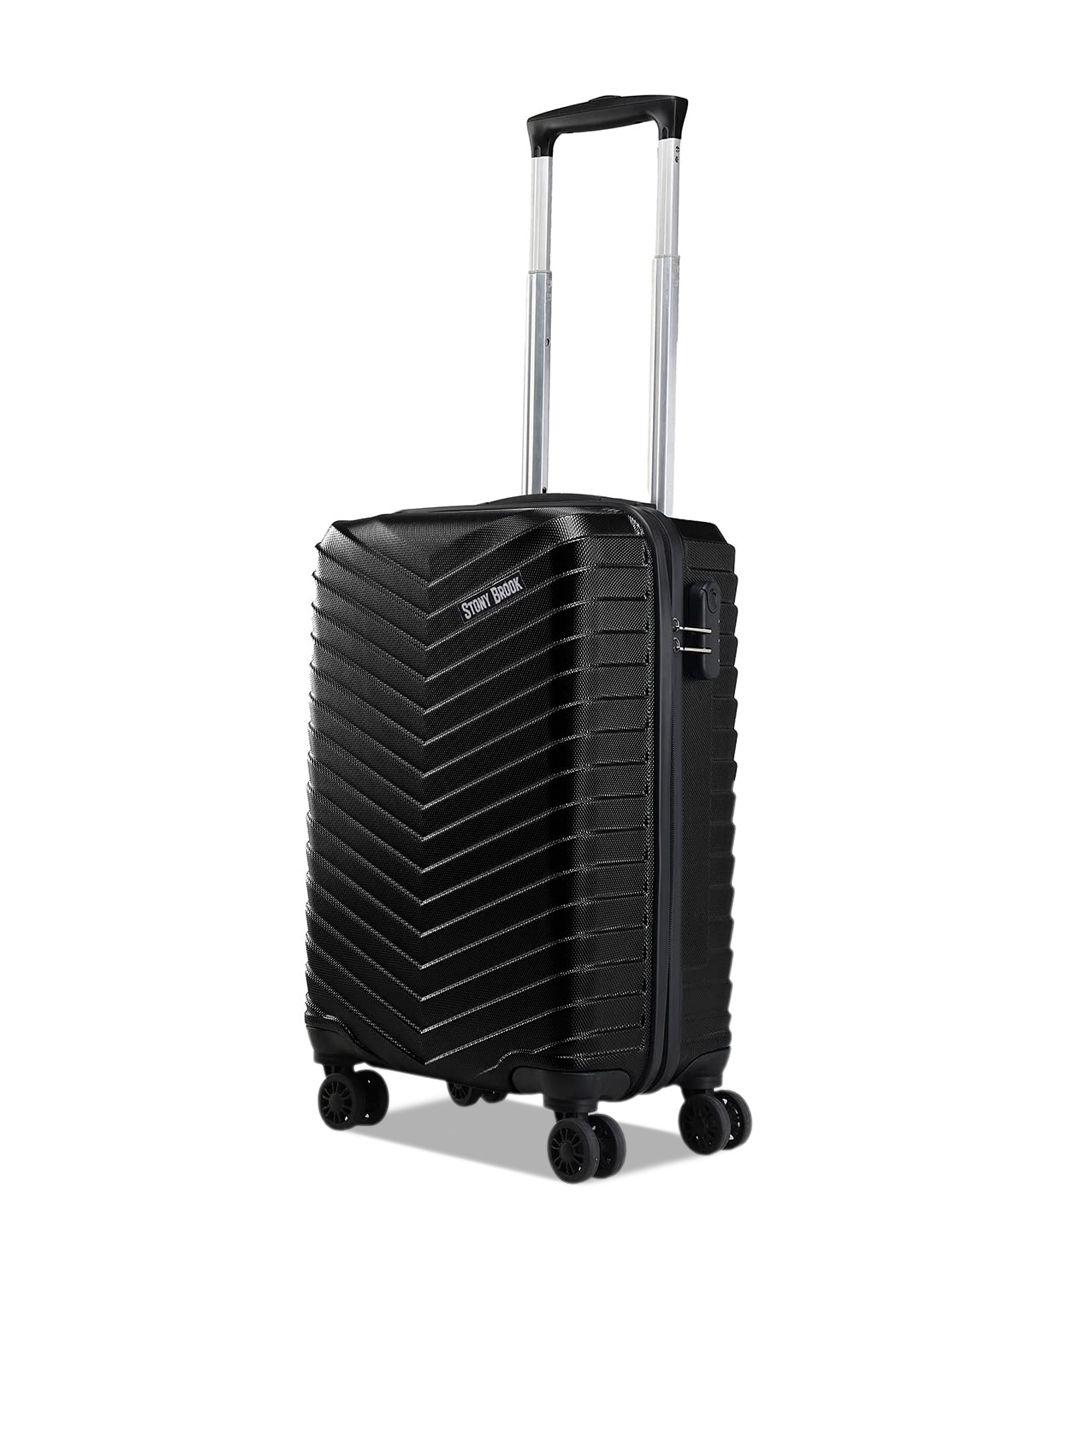 stony brook by nasher miles textured hard-sided trolley suitcase